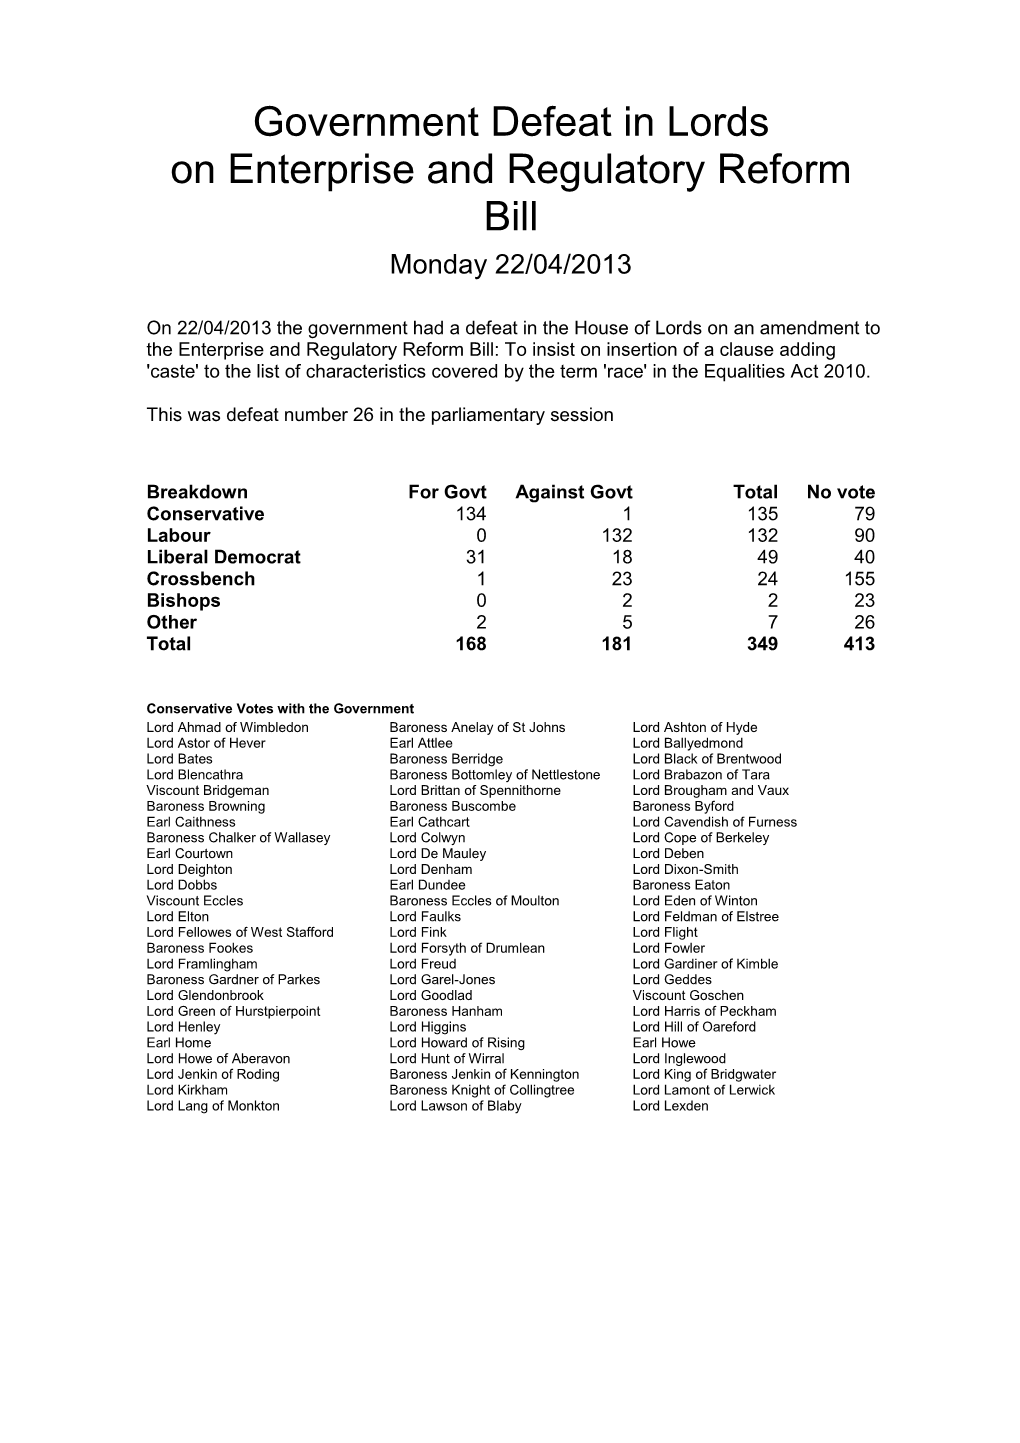 Government Defeat in Lords on Enterprise and Regulatory Reform Bill Monday 22/04/2013